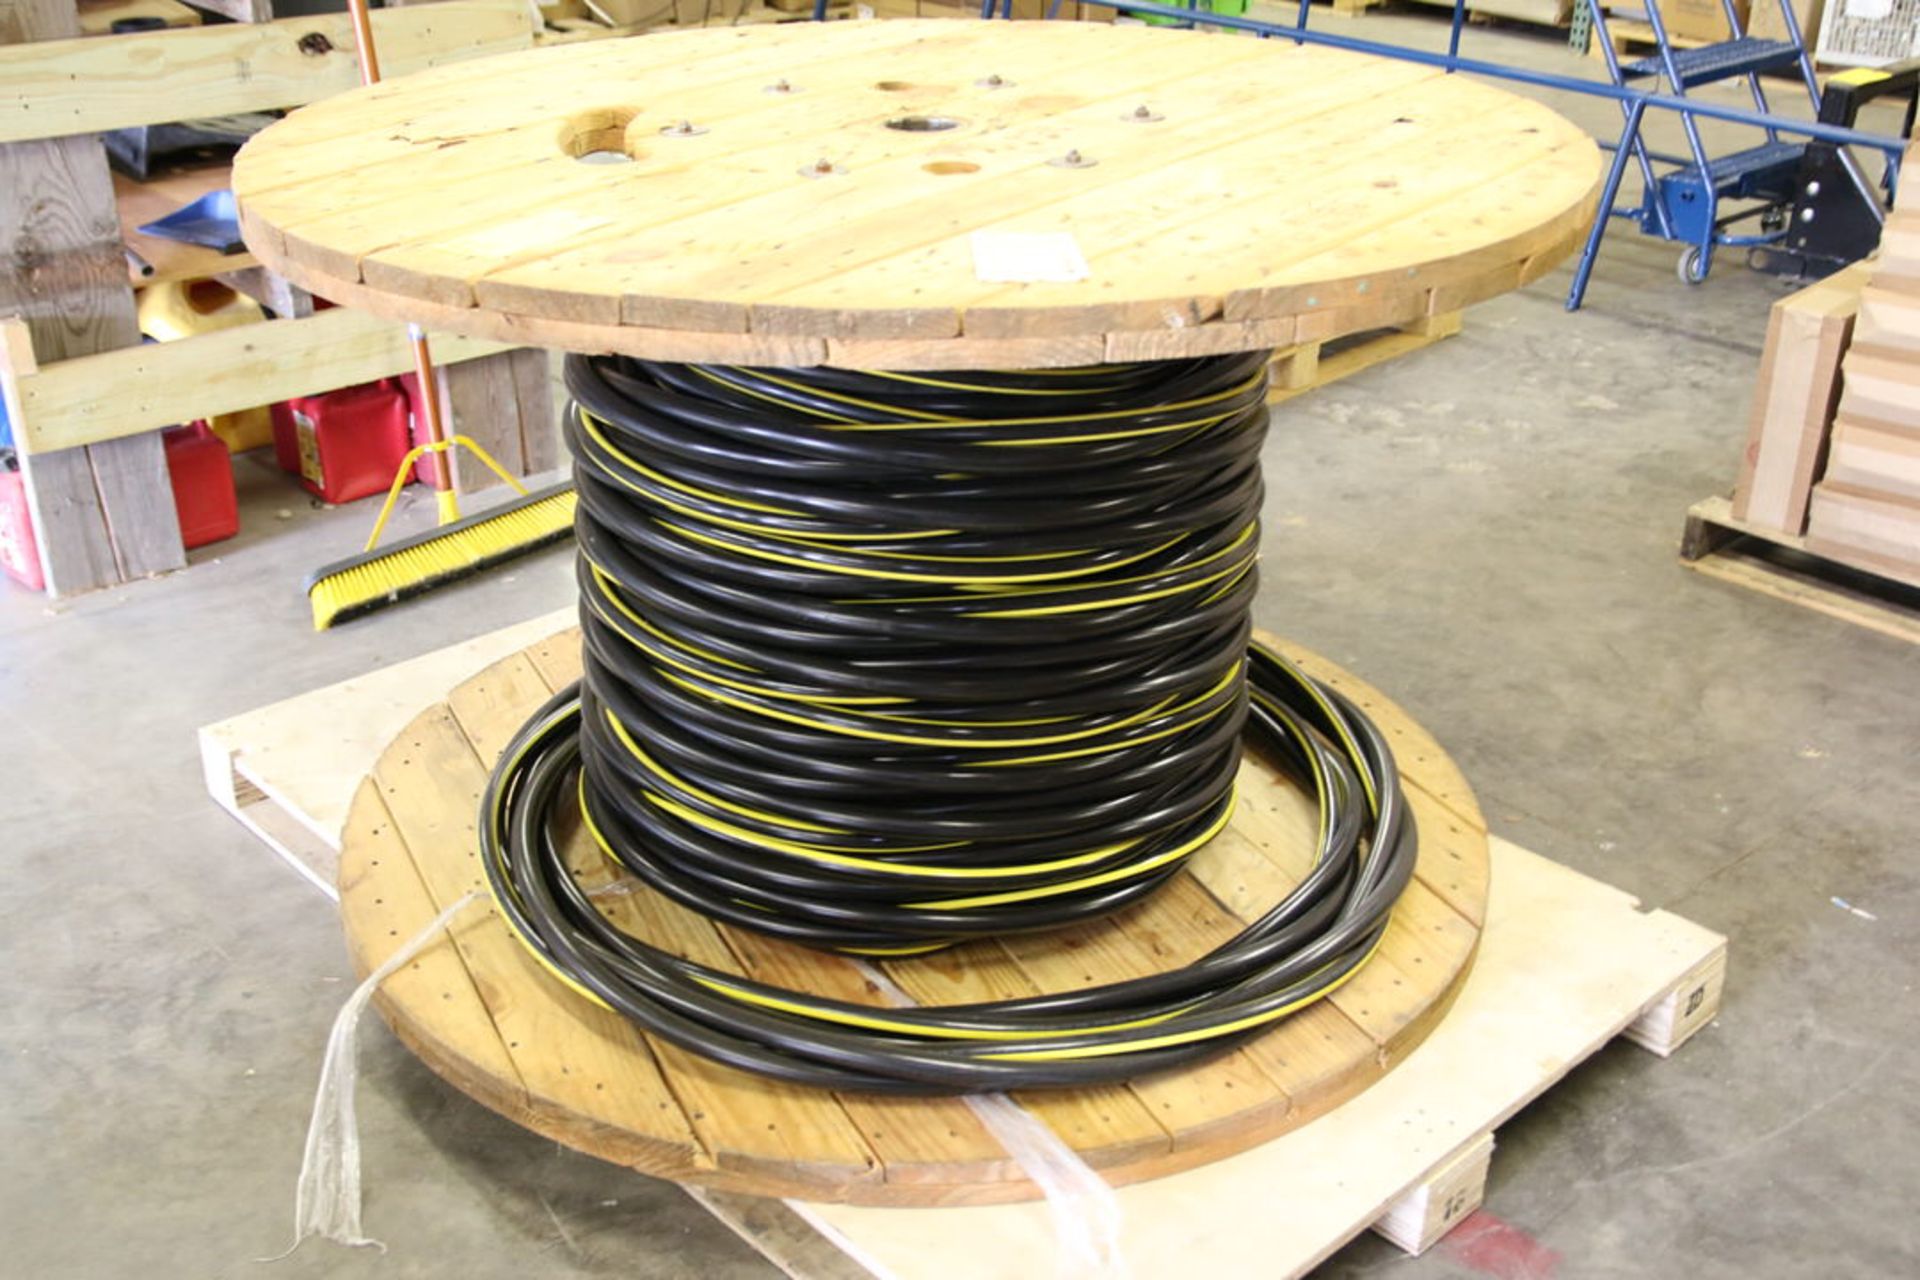 Spool of 600V, 1 1/4" Use-2 Cable